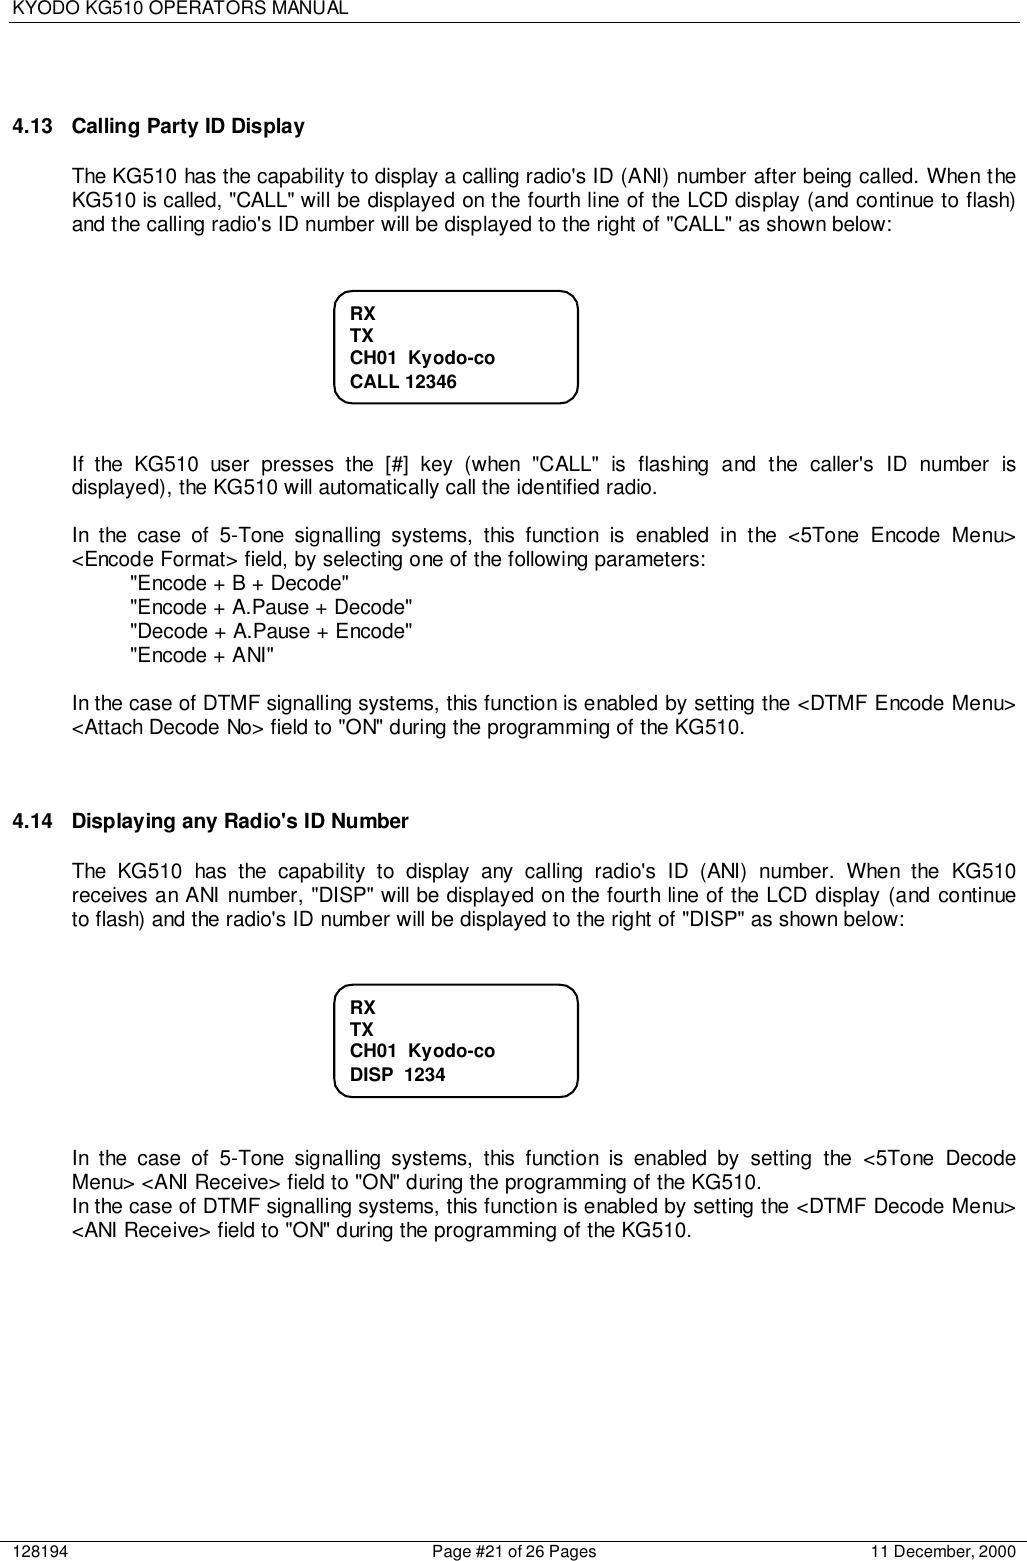 KYODO KG510 OPERATORS MANUAL128194 Page #21 of 26 Pages 11 December, 20004.13  Calling Party ID DisplayThe KG510 has the capability to display a calling radio&apos;s ID (ANI) number after being called. When theKG510 is called, &quot;CALL&quot; will be displayed on the fourth line of the LCD display (and continue to flash)and the calling radio&apos;s ID number will be displayed to the right of &quot;CALL&quot; as shown below:If the KG510 user presses the [#] key (when &quot;CALL&quot; is flashing and the caller&apos;s ID number isdisplayed), the KG510 will automatically call the identified radio.In the case of 5-Tone signalling systems, this function is enabled in the &lt;5Tone Encode Menu&gt;&lt;Encode Format&gt; field, by selecting one of the following parameters:&quot;Encode + B + Decode&quot;&quot;Encode + A.Pause + Decode&quot;&quot;Decode + A.Pause + Encode&quot;&quot;Encode + ANI&quot;In the case of DTMF signalling systems, this function is enabled by setting the &lt;DTMF Encode Menu&gt;&lt;Attach Decode No&gt; field to &quot;ON&quot; during the programming of the KG510.4.14  Displaying any Radio&apos;s ID NumberThe KG510 has the capability to display any calling radio&apos;s ID (ANI) number. When the KG510receives an ANI number, &quot;DISP&quot; will be displayed on the fourth line of the LCD display (and continueto flash) and the radio&apos;s ID number will be displayed to the right of &quot;DISP&quot; as shown below:In the case of 5-Tone signalling systems, this function is enabled by setting the &lt;5Tone DecodeMenu&gt; &lt;ANI Receive&gt; field to &quot;ON&quot; during the programming of the KG510.In the case of DTMF signalling systems, this function is enabled by setting the &lt;DTMF Decode Menu&gt;&lt;ANI Receive&gt; field to &quot;ON&quot; during the programming of the KG510.RXTXCH01  Kyodo-coCALL 12346RXTXCH01  Kyodo-coDISP  1234